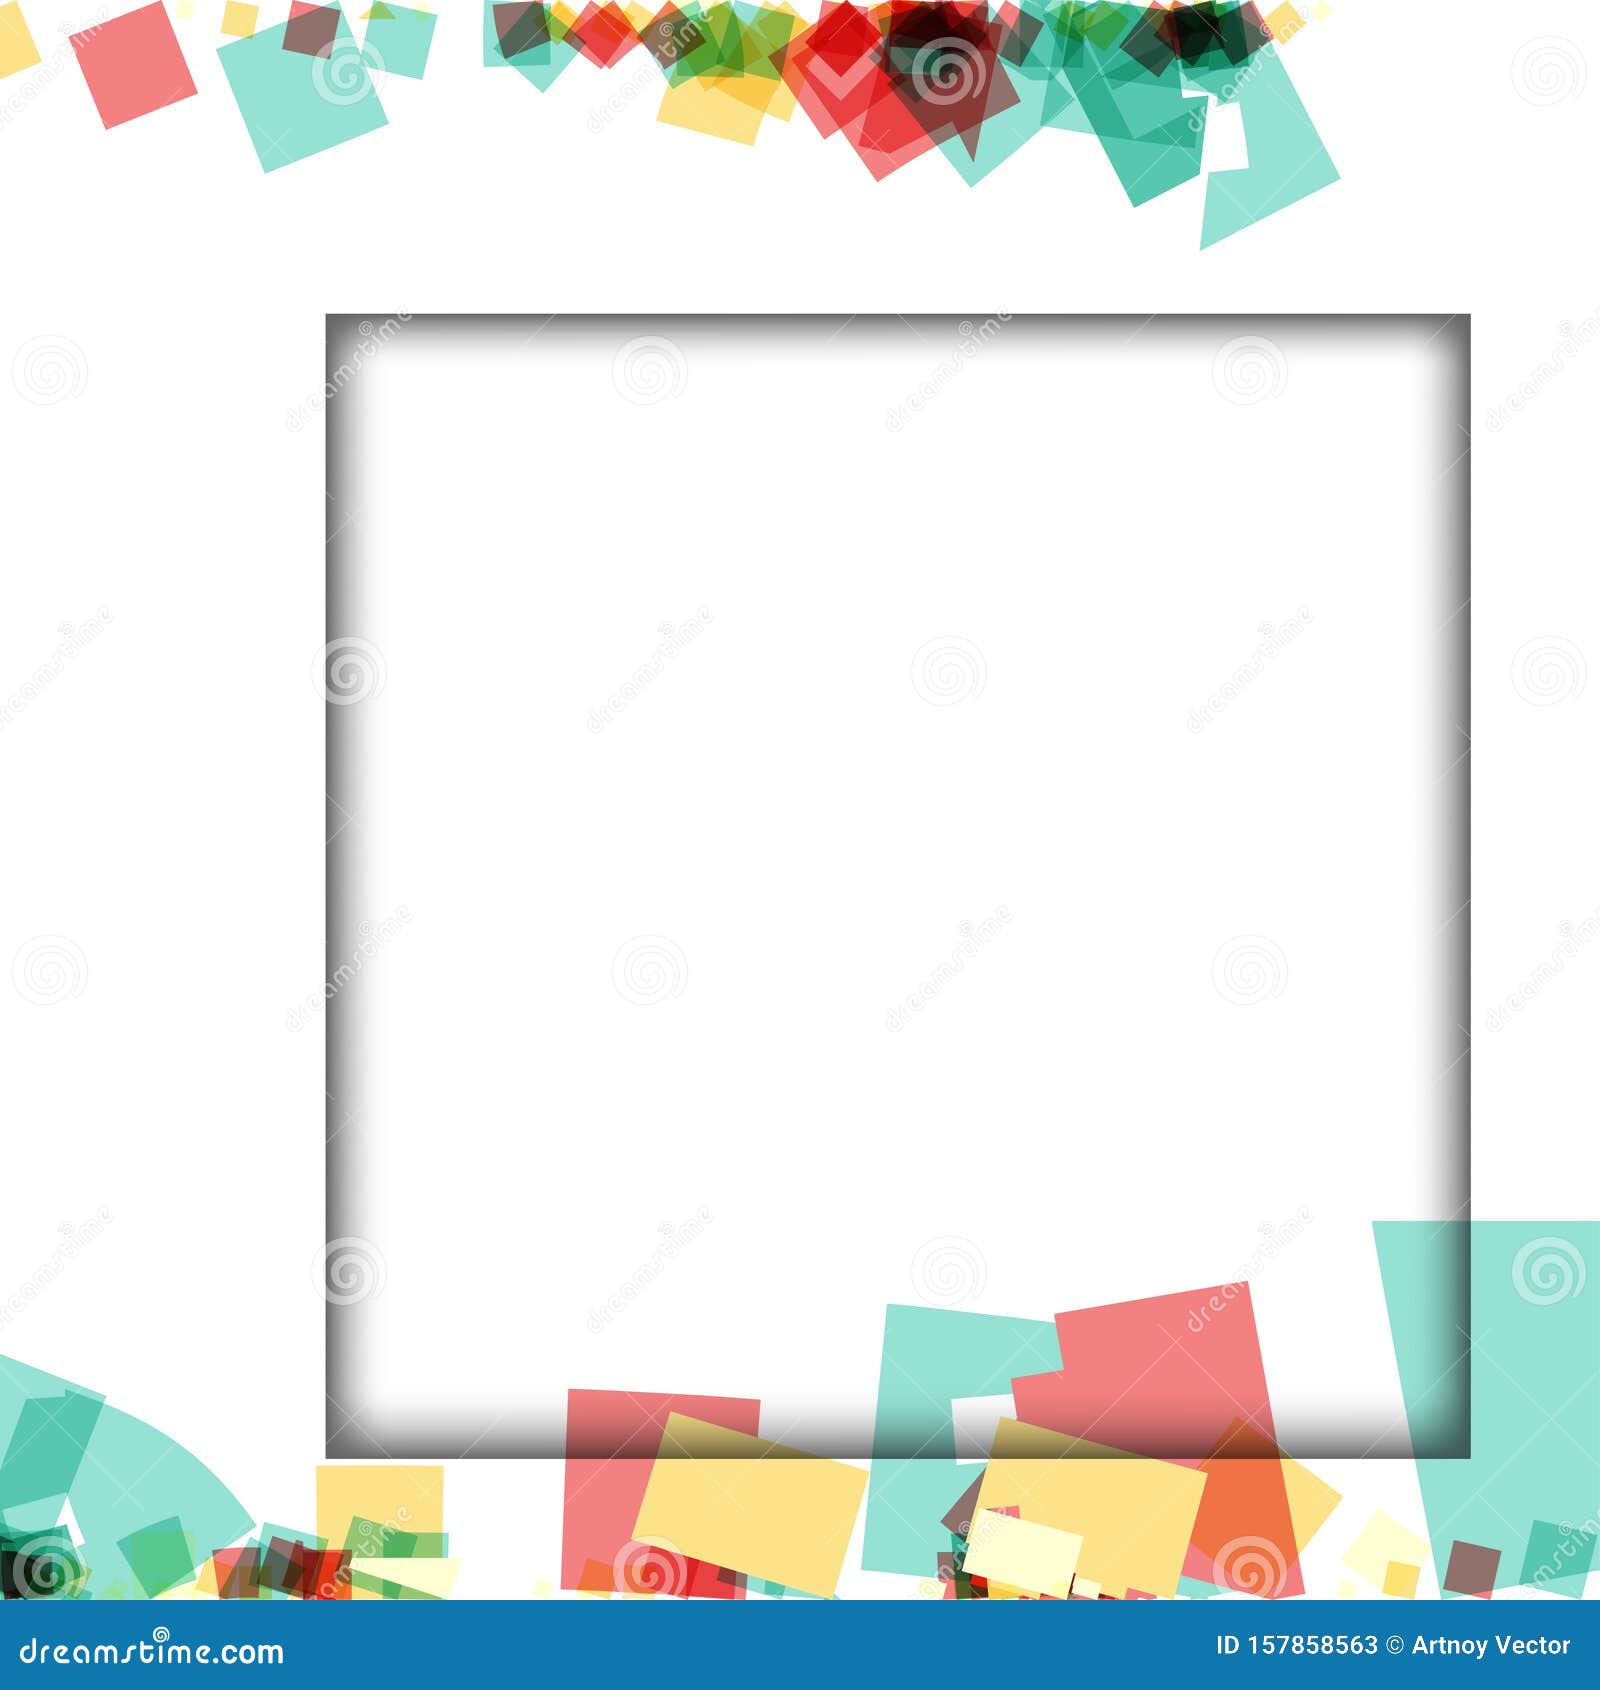 Colorful Photo Frames, Vector Illustrations. Square Borders with ...